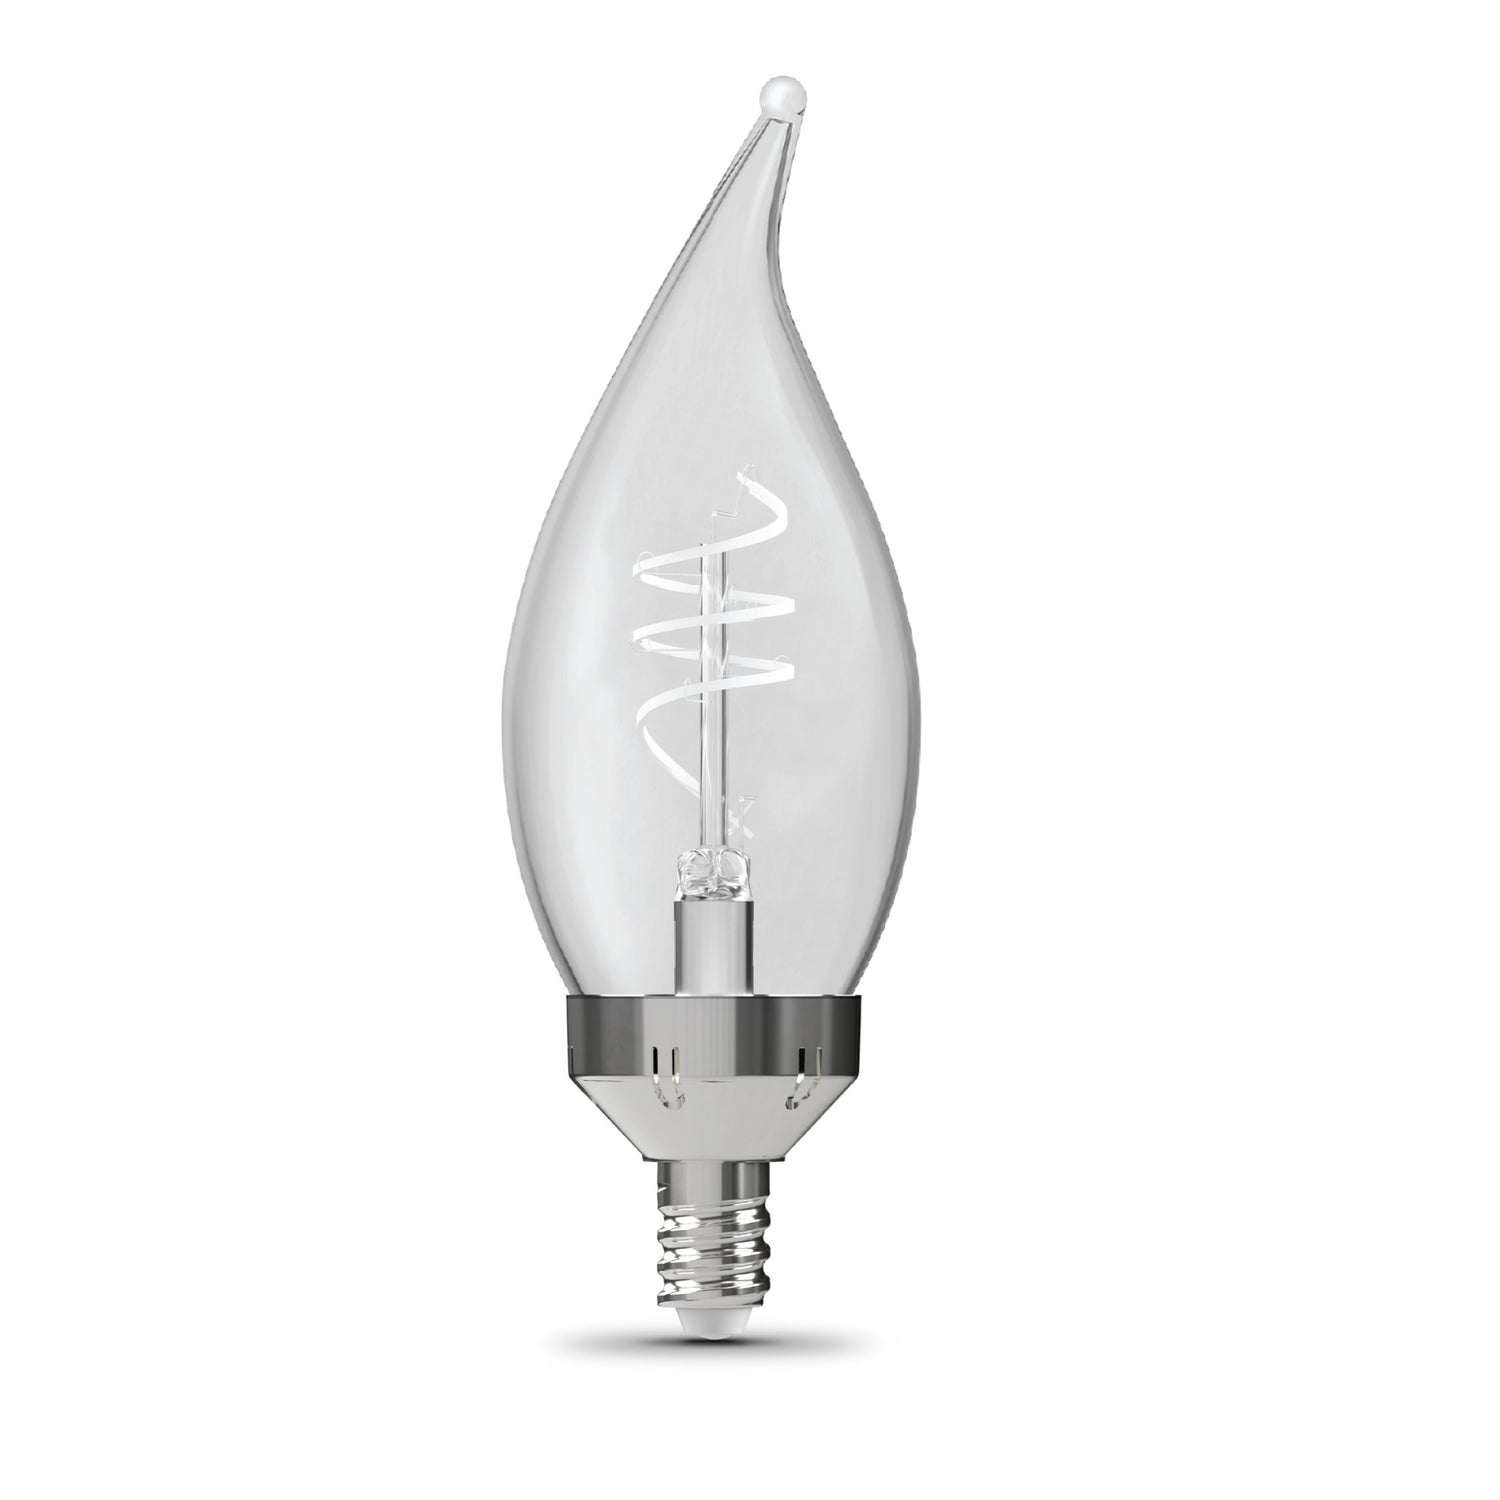 5.5W (60W Replacement) True White (3500K) E12 Base BA11 Flame Tip 3-Level Dimming White Filament LED Bulb (3-Pack)